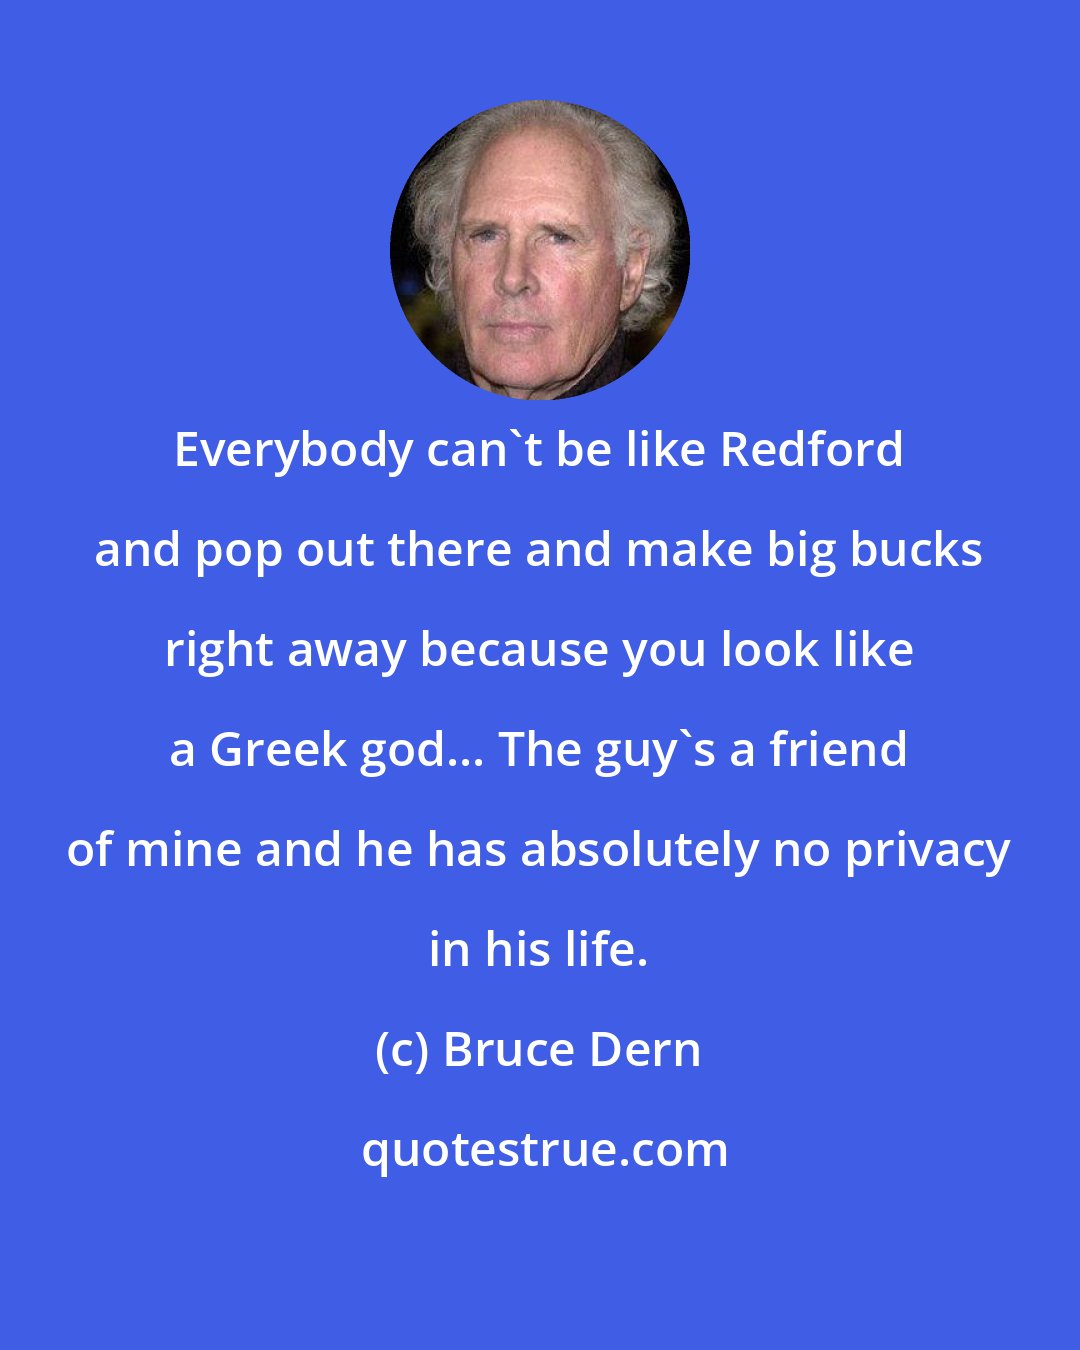 Bruce Dern: Everybody can't be like Redford and pop out there and make big bucks right away because you look like a Greek god... The guy's a friend of mine and he has absolutely no privacy in his life.